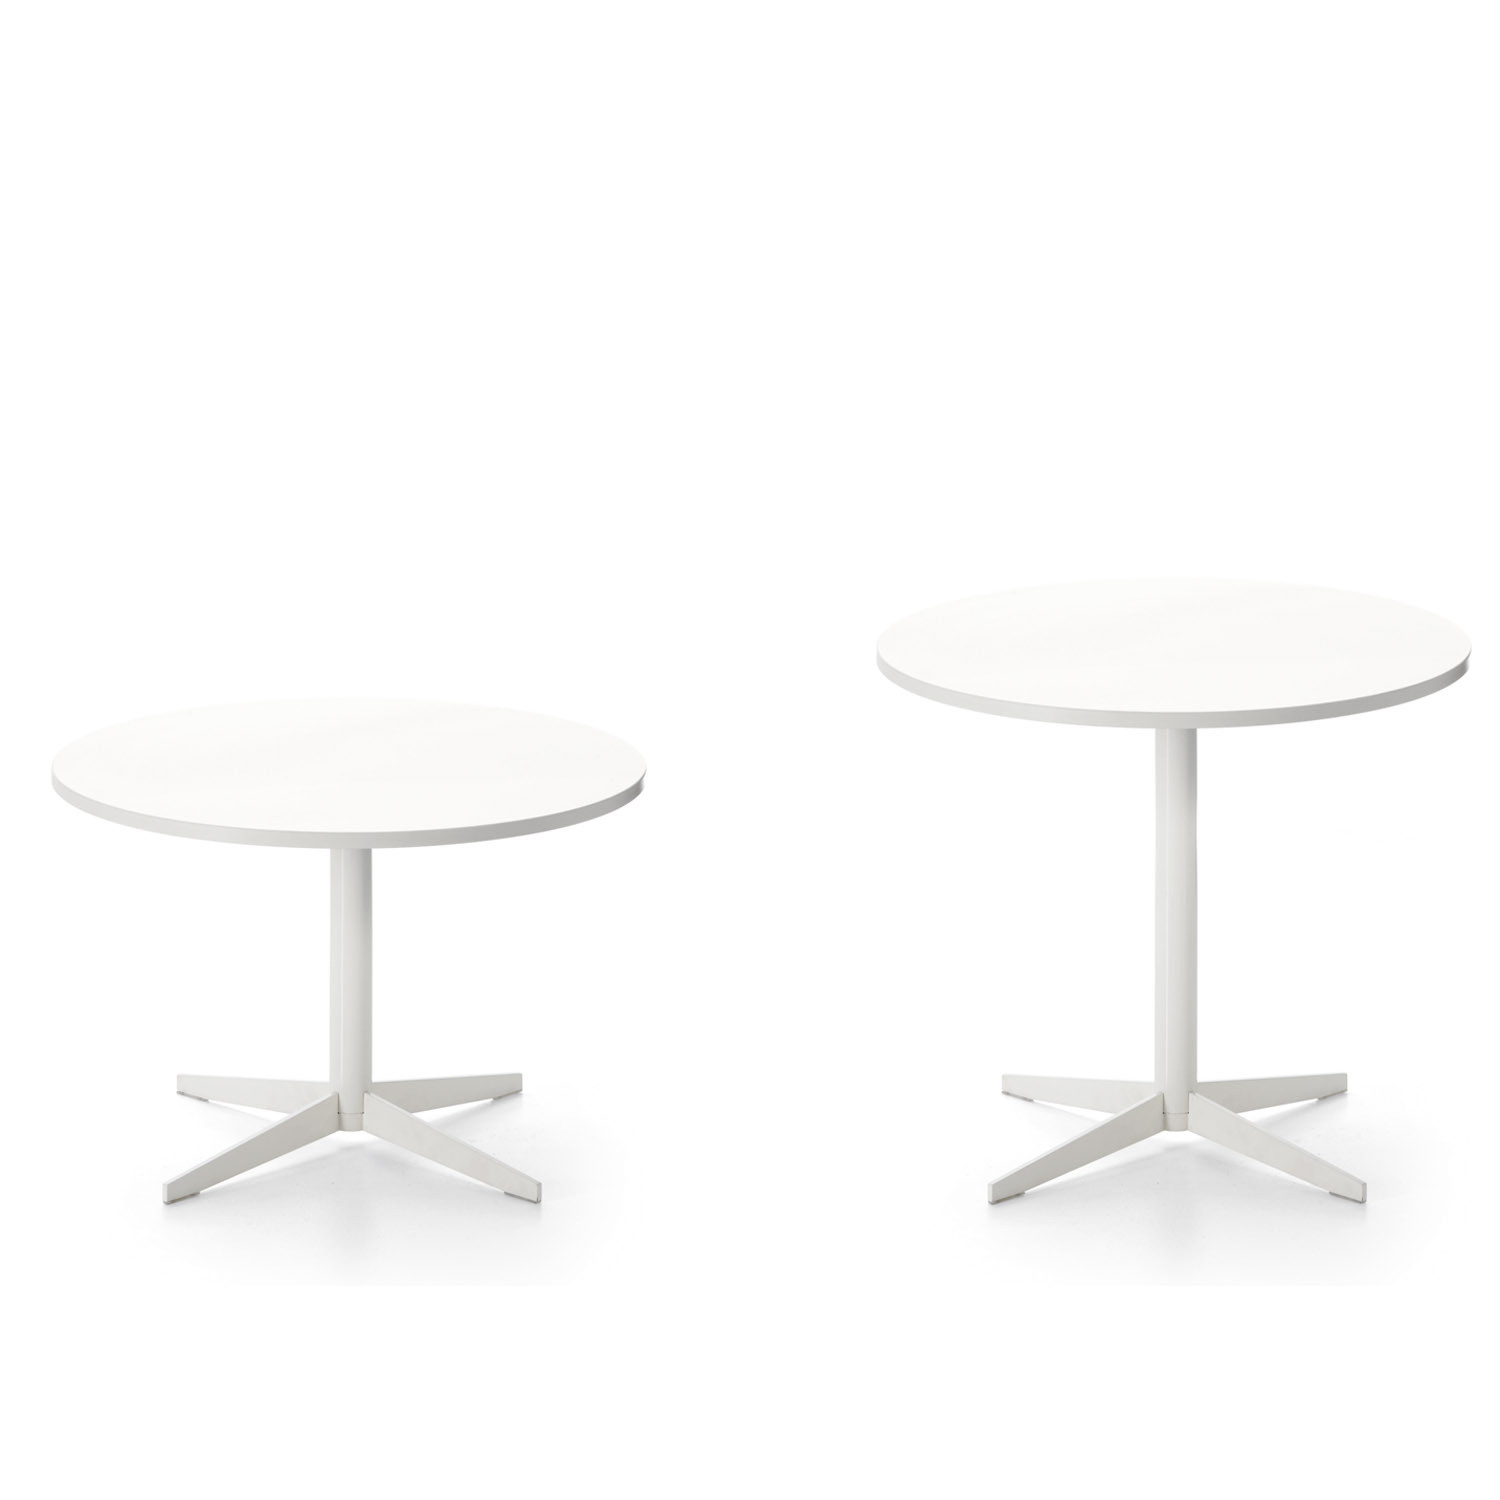 MultiTask Tables with 4-Star Base